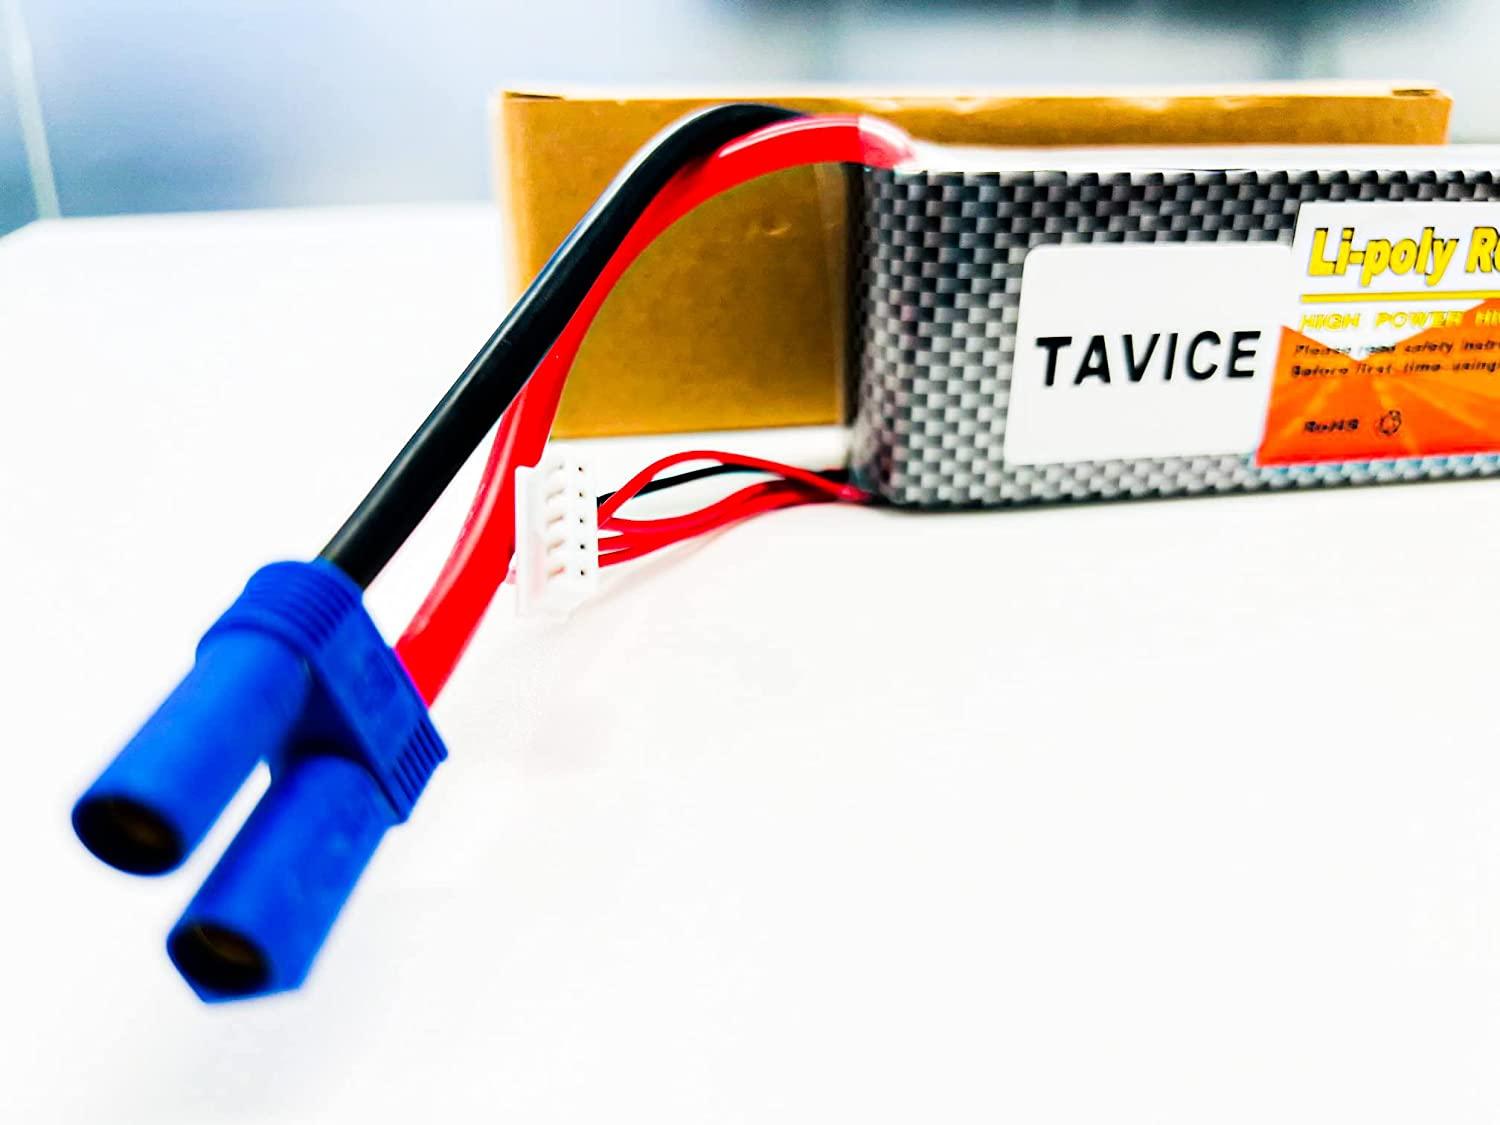 Tavice 4S Lipo Battery 6000mAh 14.8V 100C with EC5 Plug Soft Case for RC Plane Quadcopter Airplane Helicopter RC Car Truck RC Boat - Office Catch